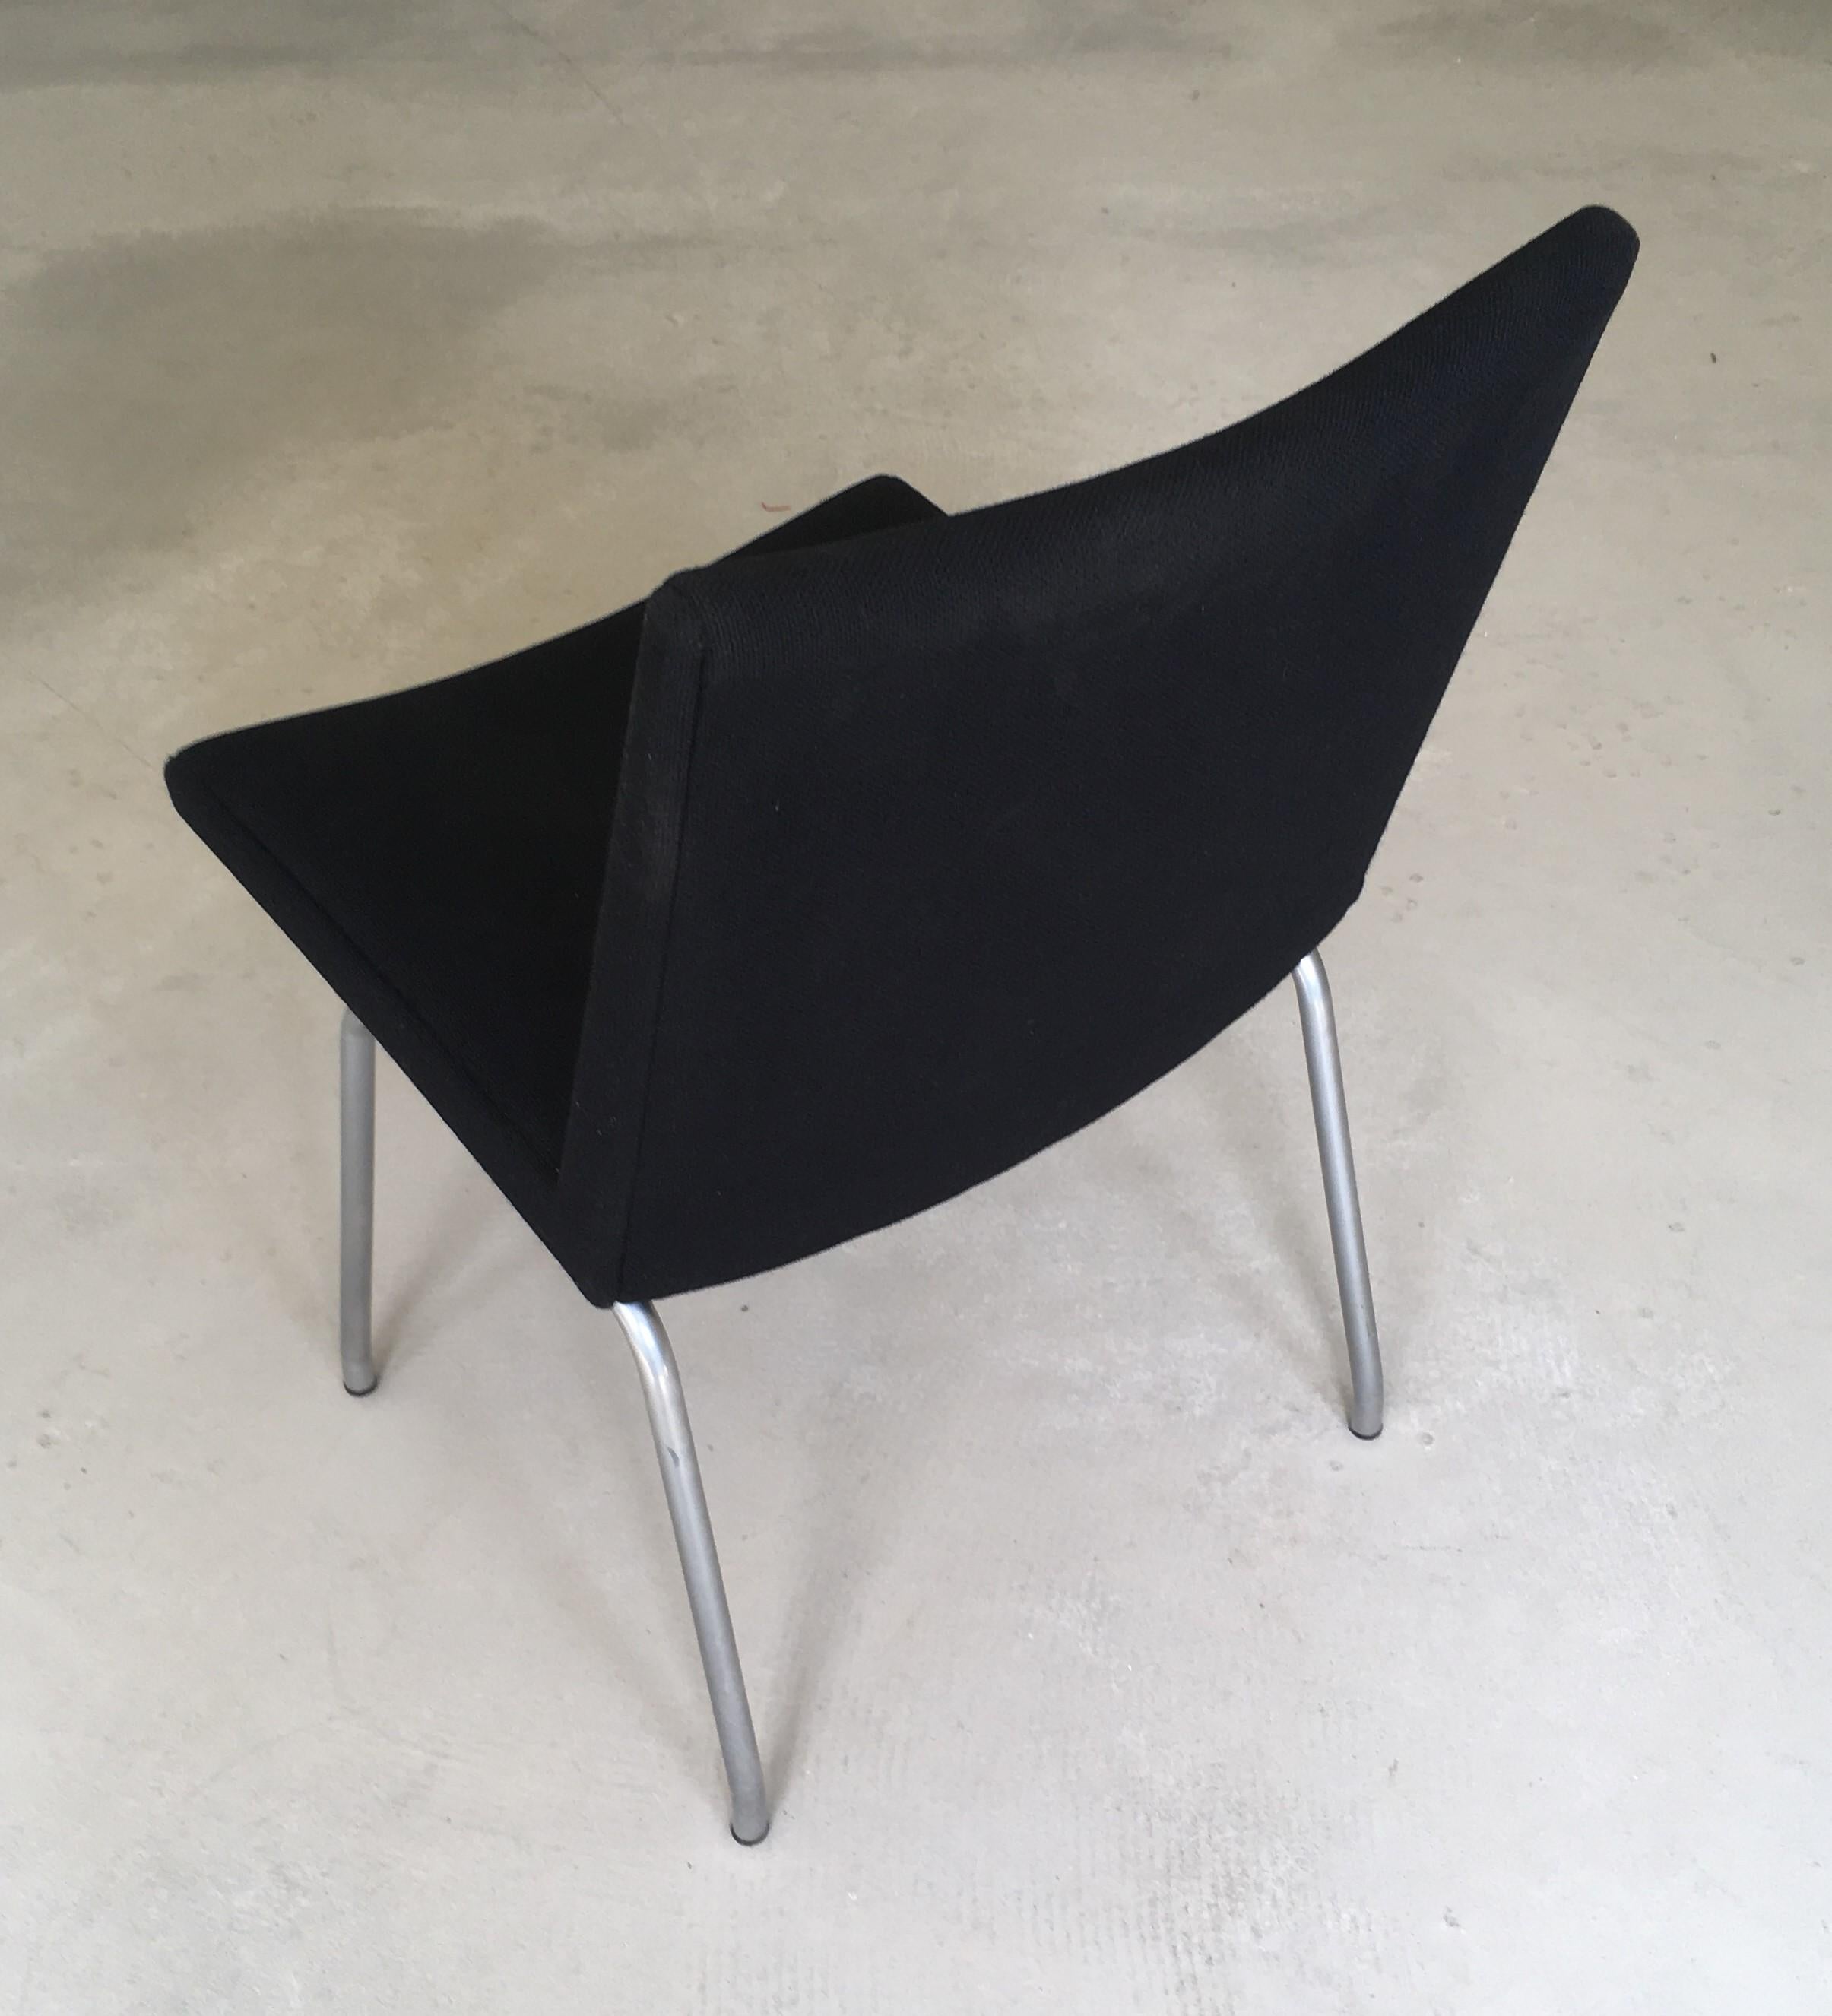 1960s Danish Hans J. Wegner Airport Chair Reupholstered in Black Fabric In Good Condition For Sale In Knebel, DK